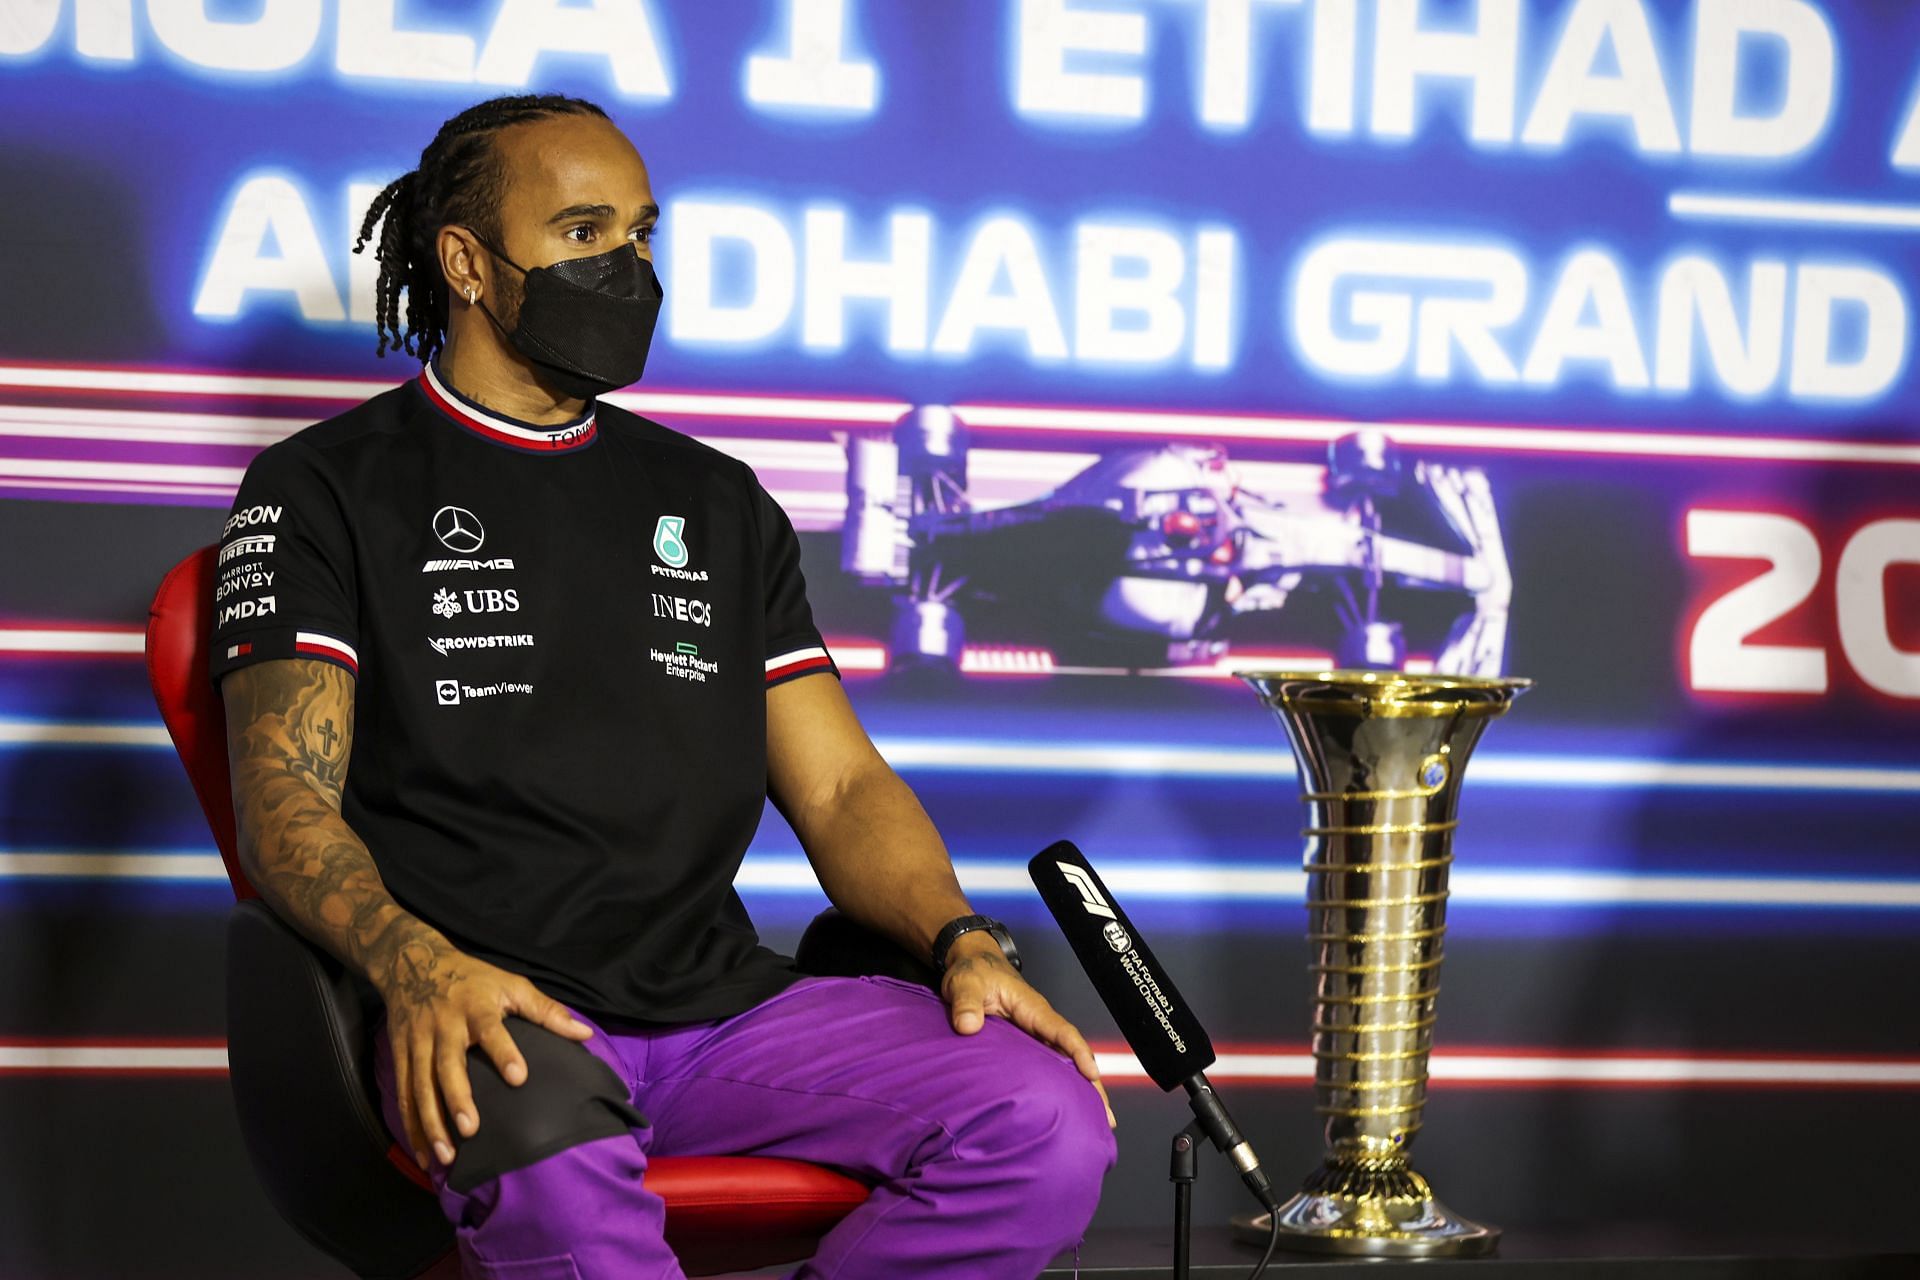 Lewis Hamilton talks in the Drivers Press Conference during previews ahead of the 2021 Abu Dhabi Grand Prix. (Photo by Antonin Vincent - Pool/Getty Images)